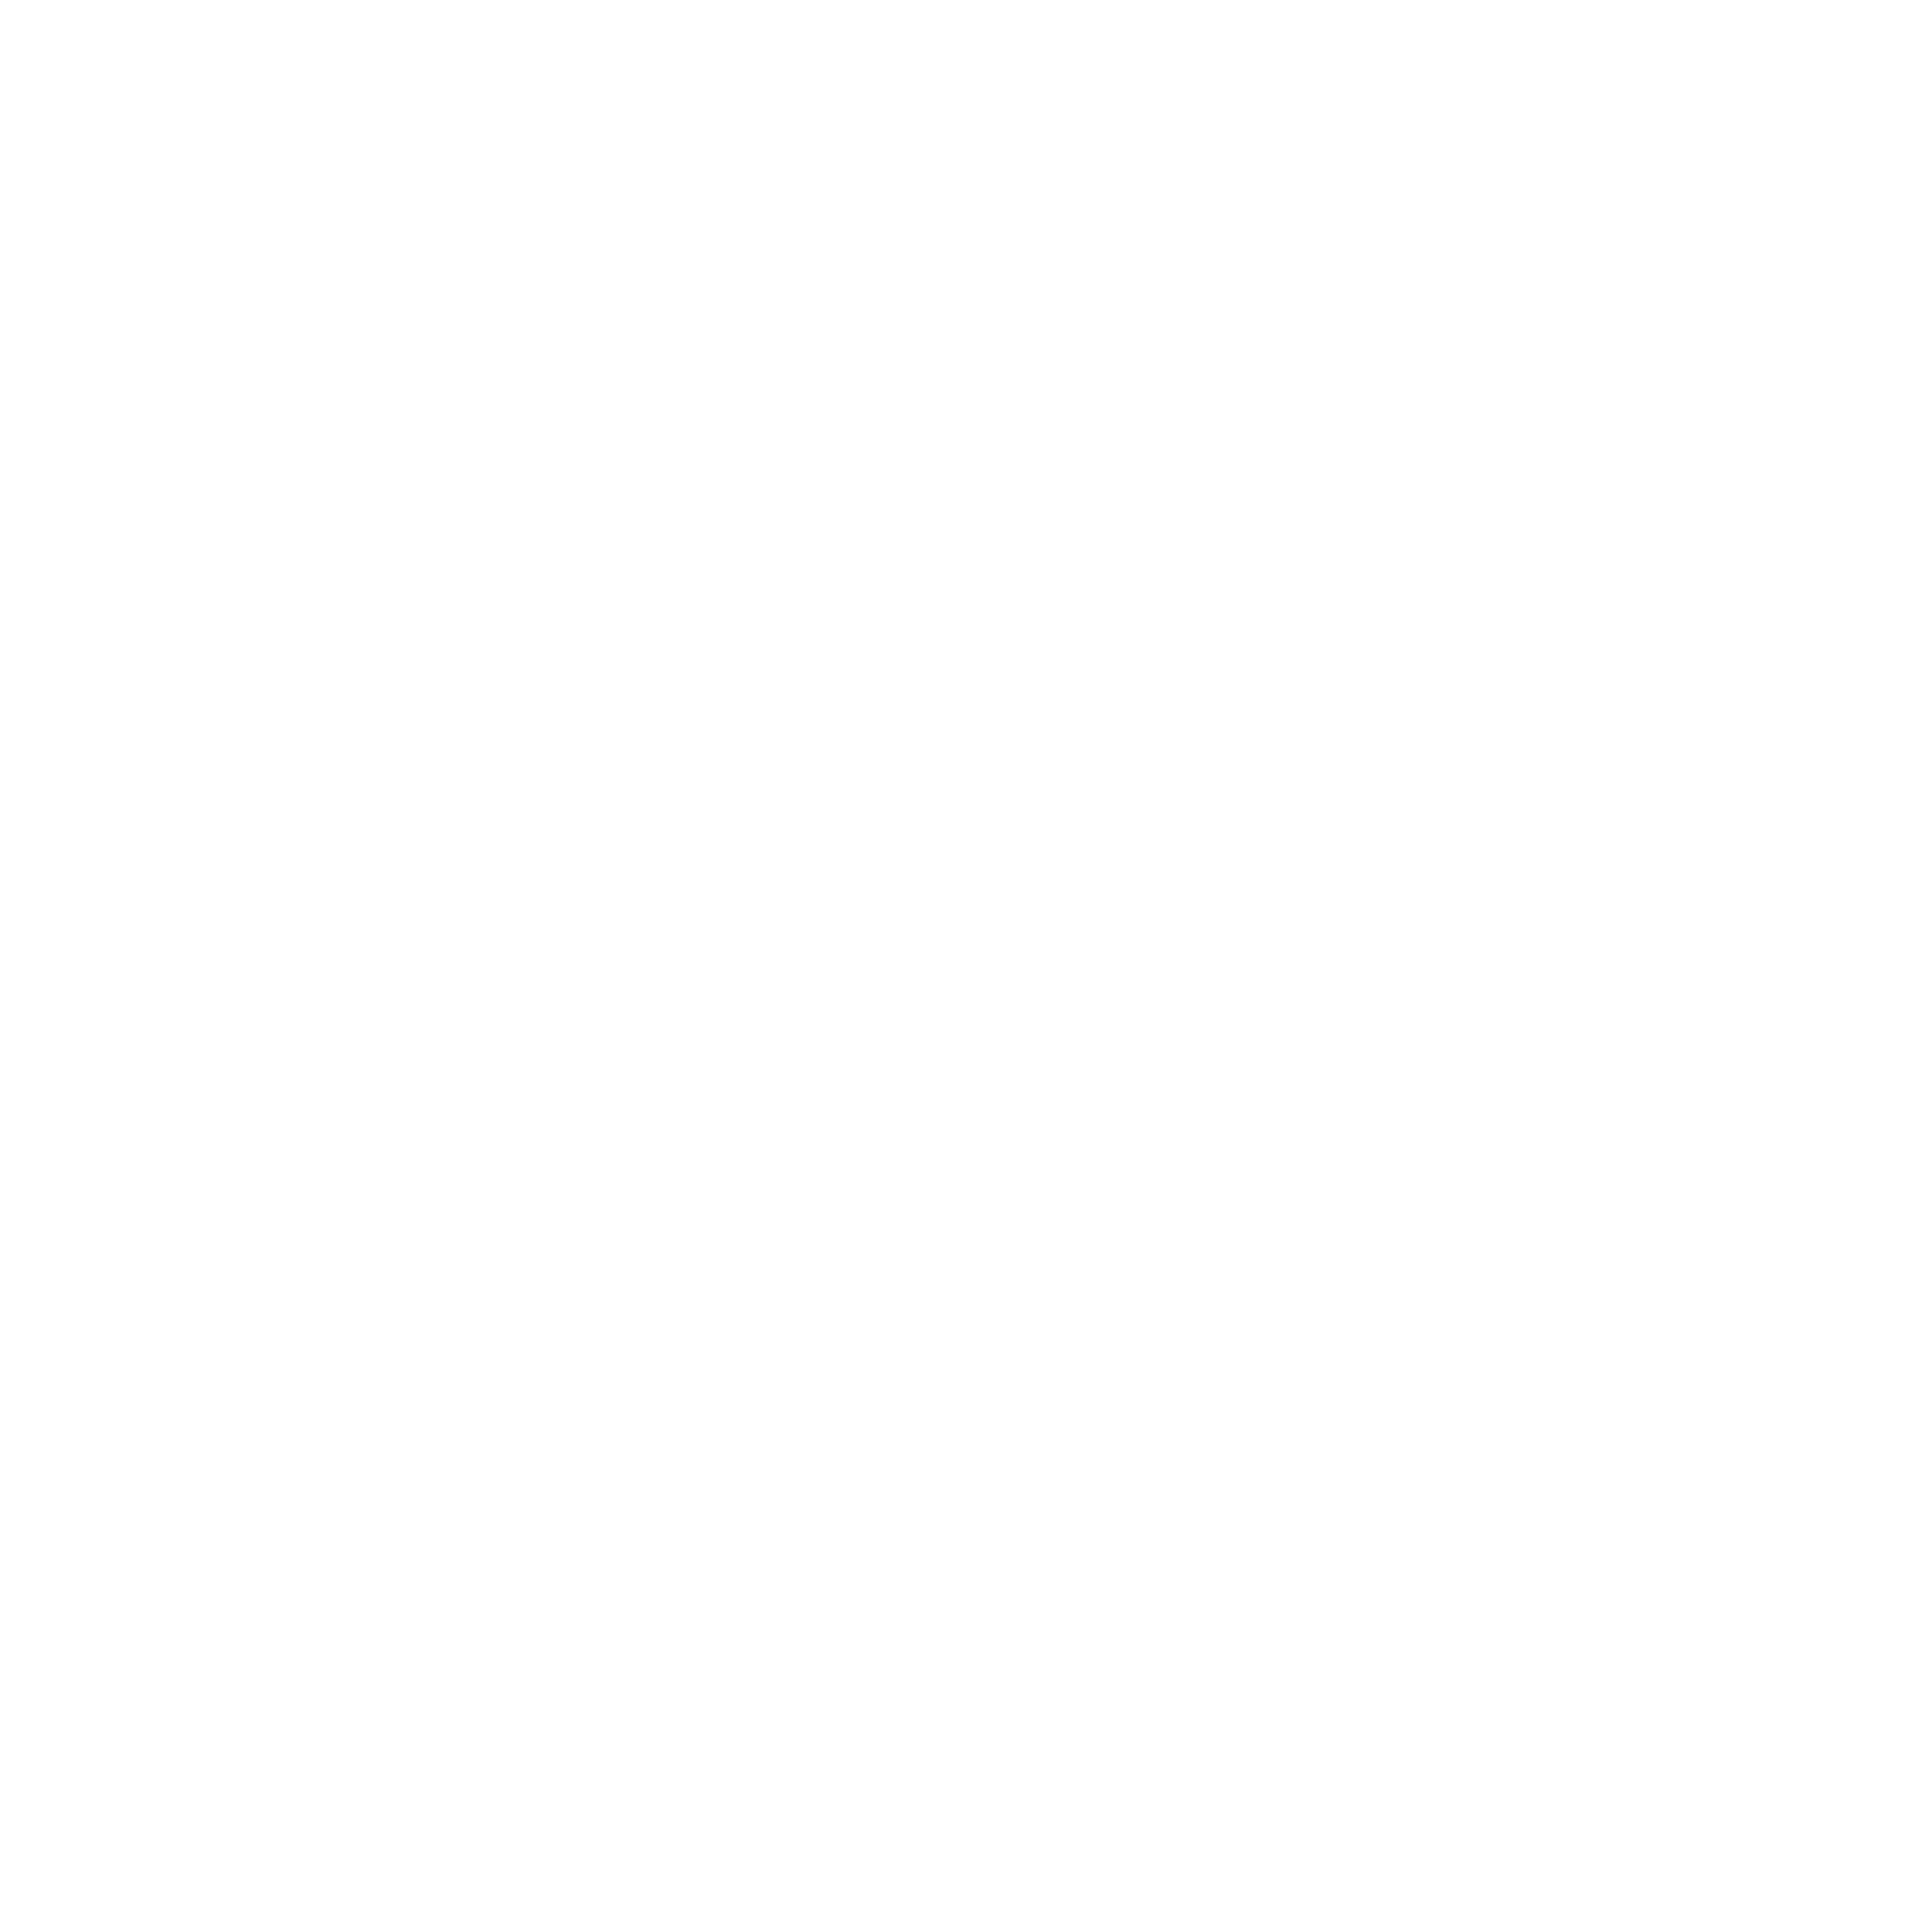 Centrepoint Theatre • 2017